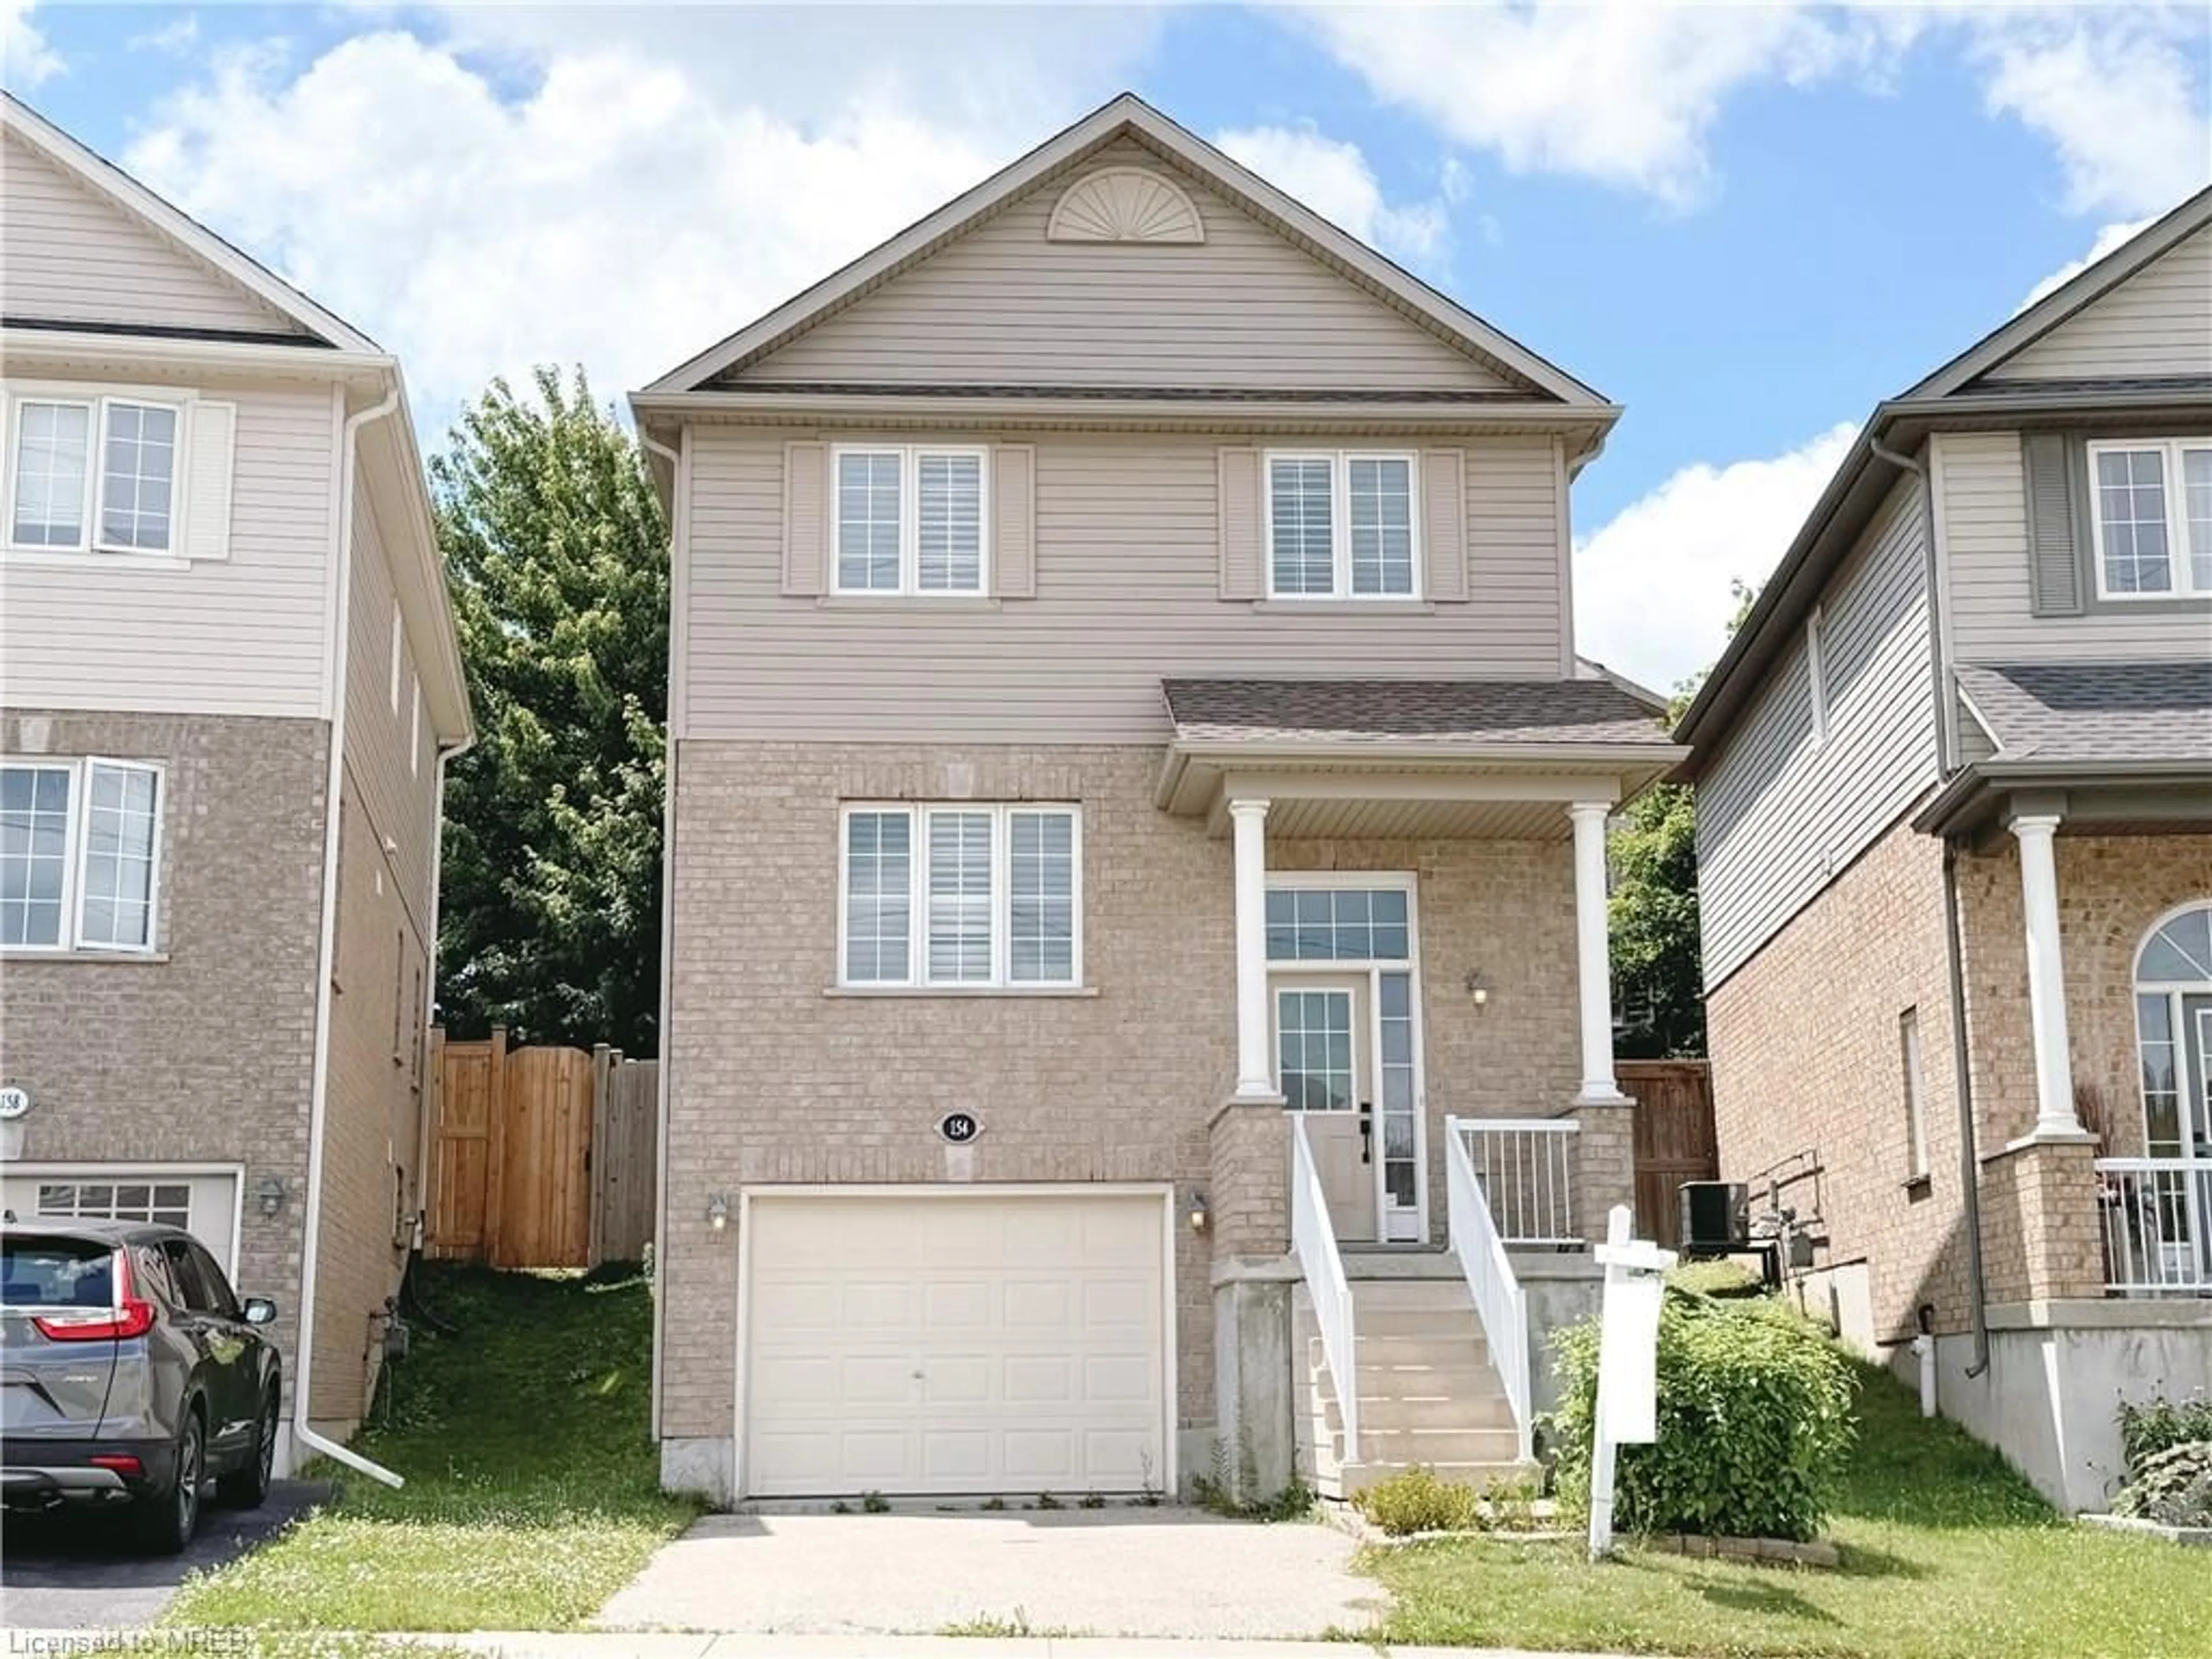 Frontside or backside of a home for 154 Newcastle Dr, Kitchener Ontario N2R 1W4